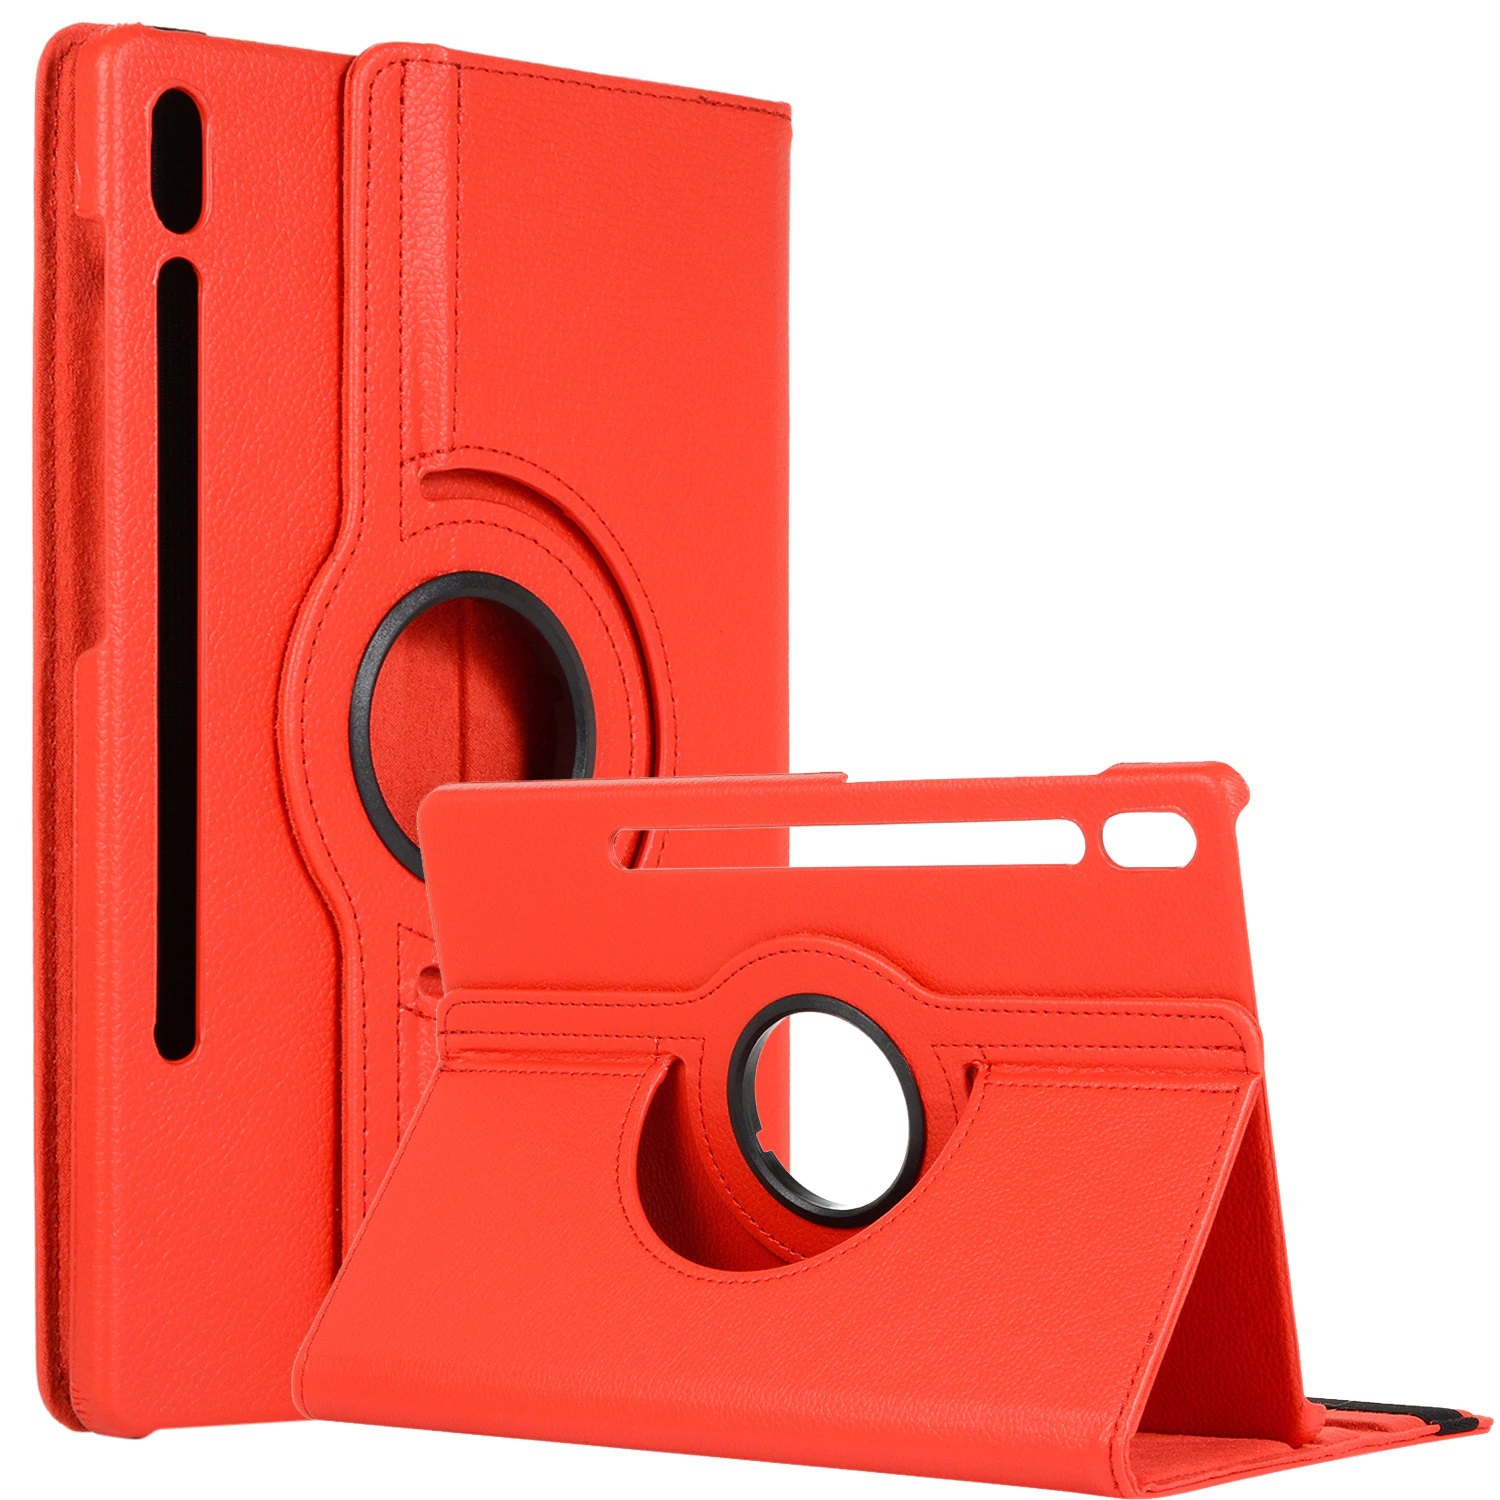 【CSmart】 Rotating PU Leather Stand Case Smart Cover for Samsung Galaxy Tab S7 Plus / S8 Plus 2022 12.4", T970 / X800, Red